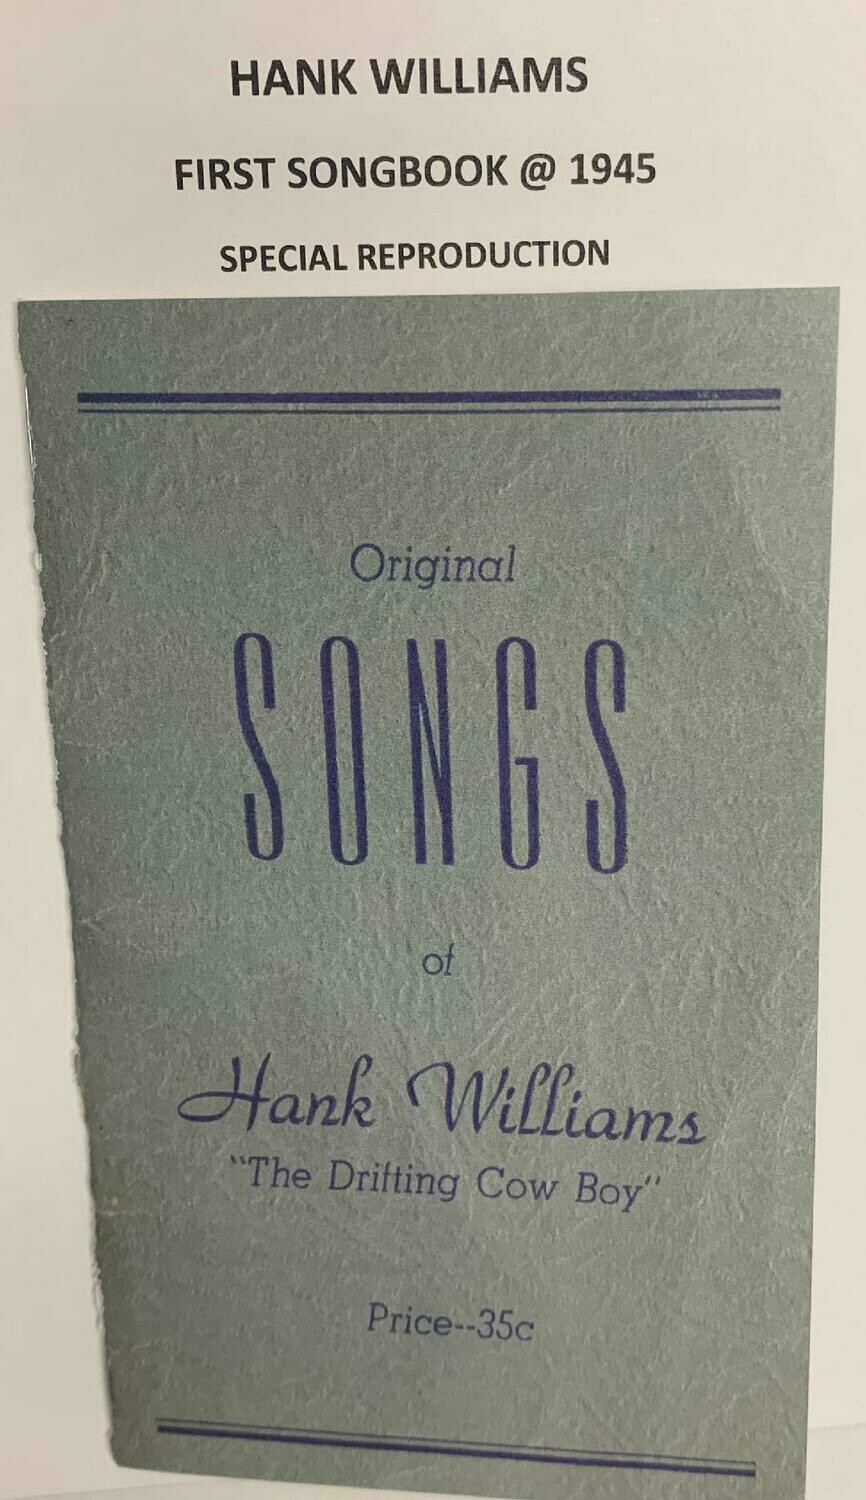 Songbook - Hank Williams First Songbook - Reproduction